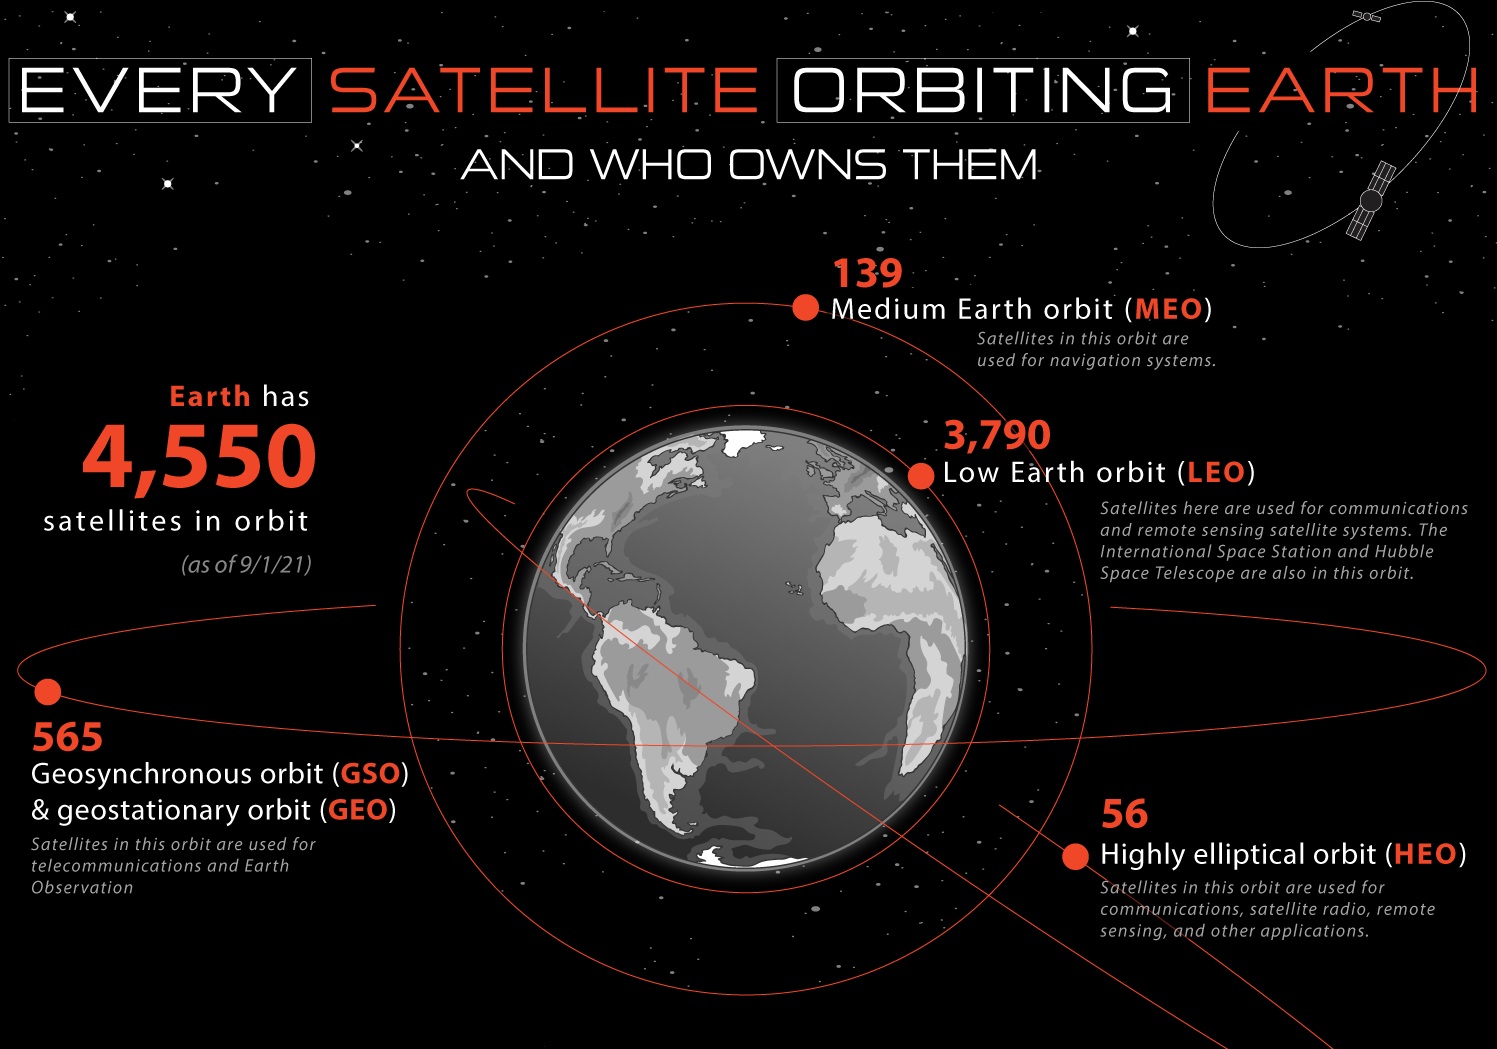 Every Satellite Orbiting Earth - Who Owns Them - By Orbit